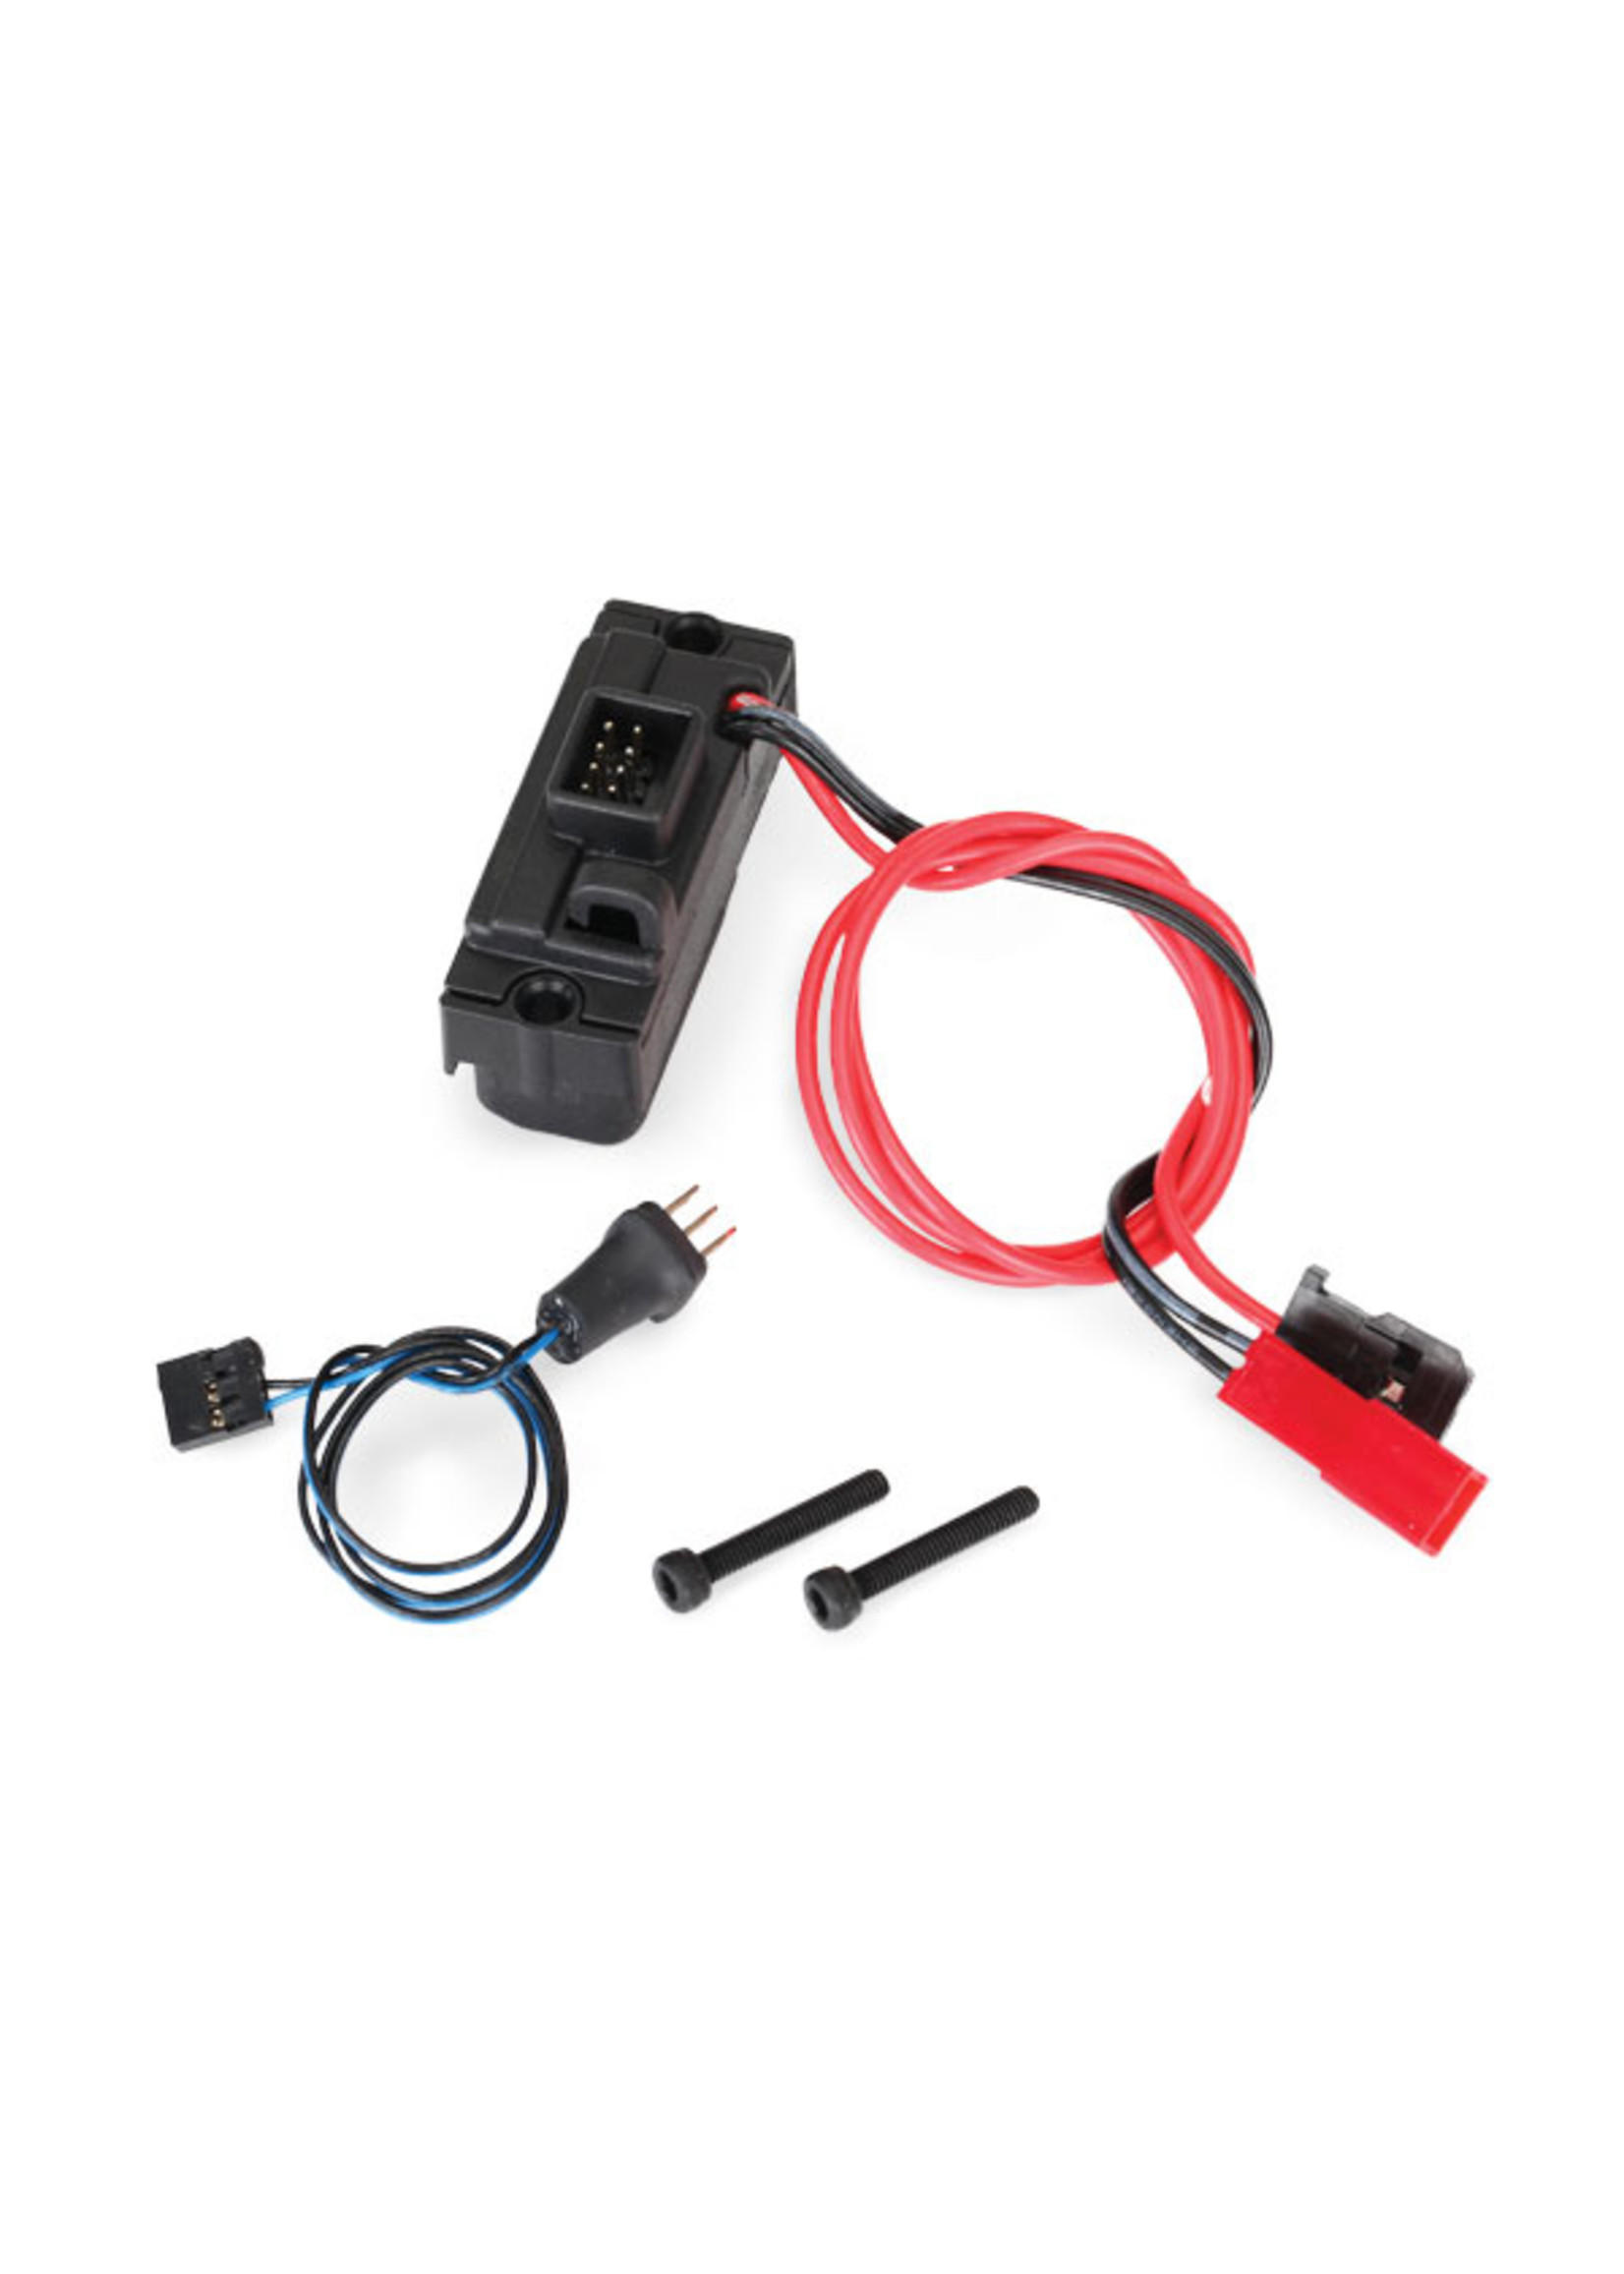 Traxxas 8028 - LED Lights, Power Supply